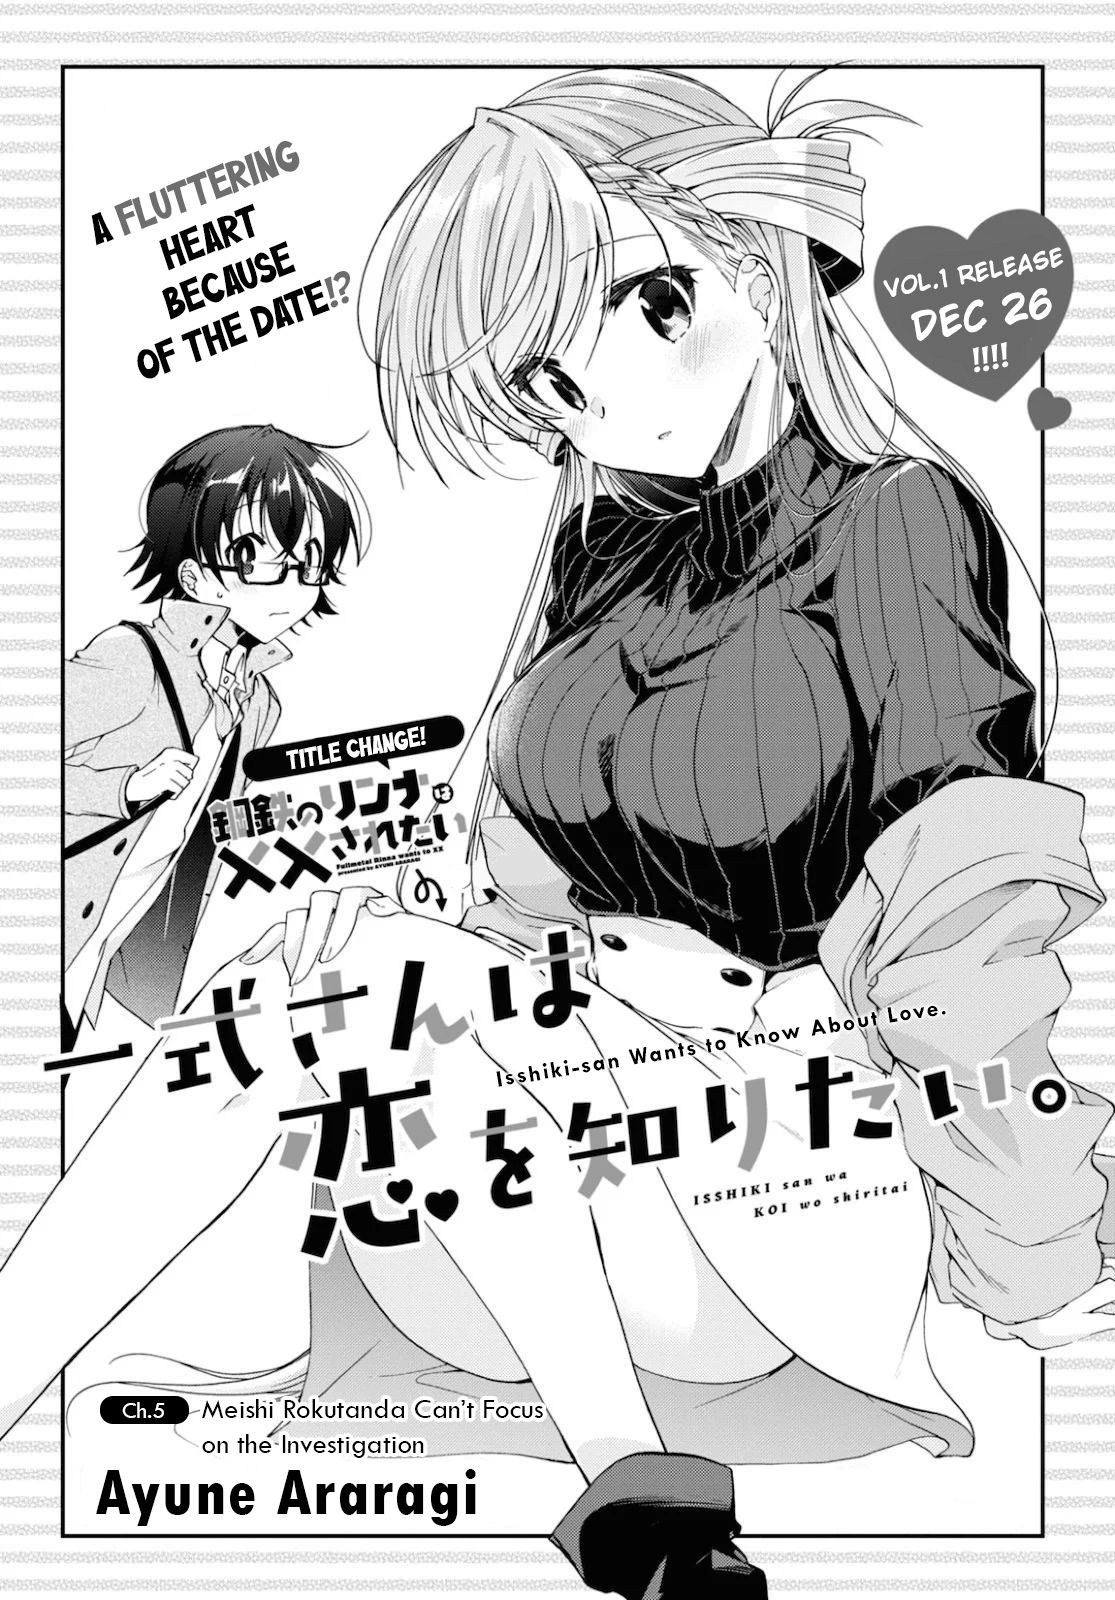 Isshiki-san Wants to Know About Love. - chapter 5 - #1